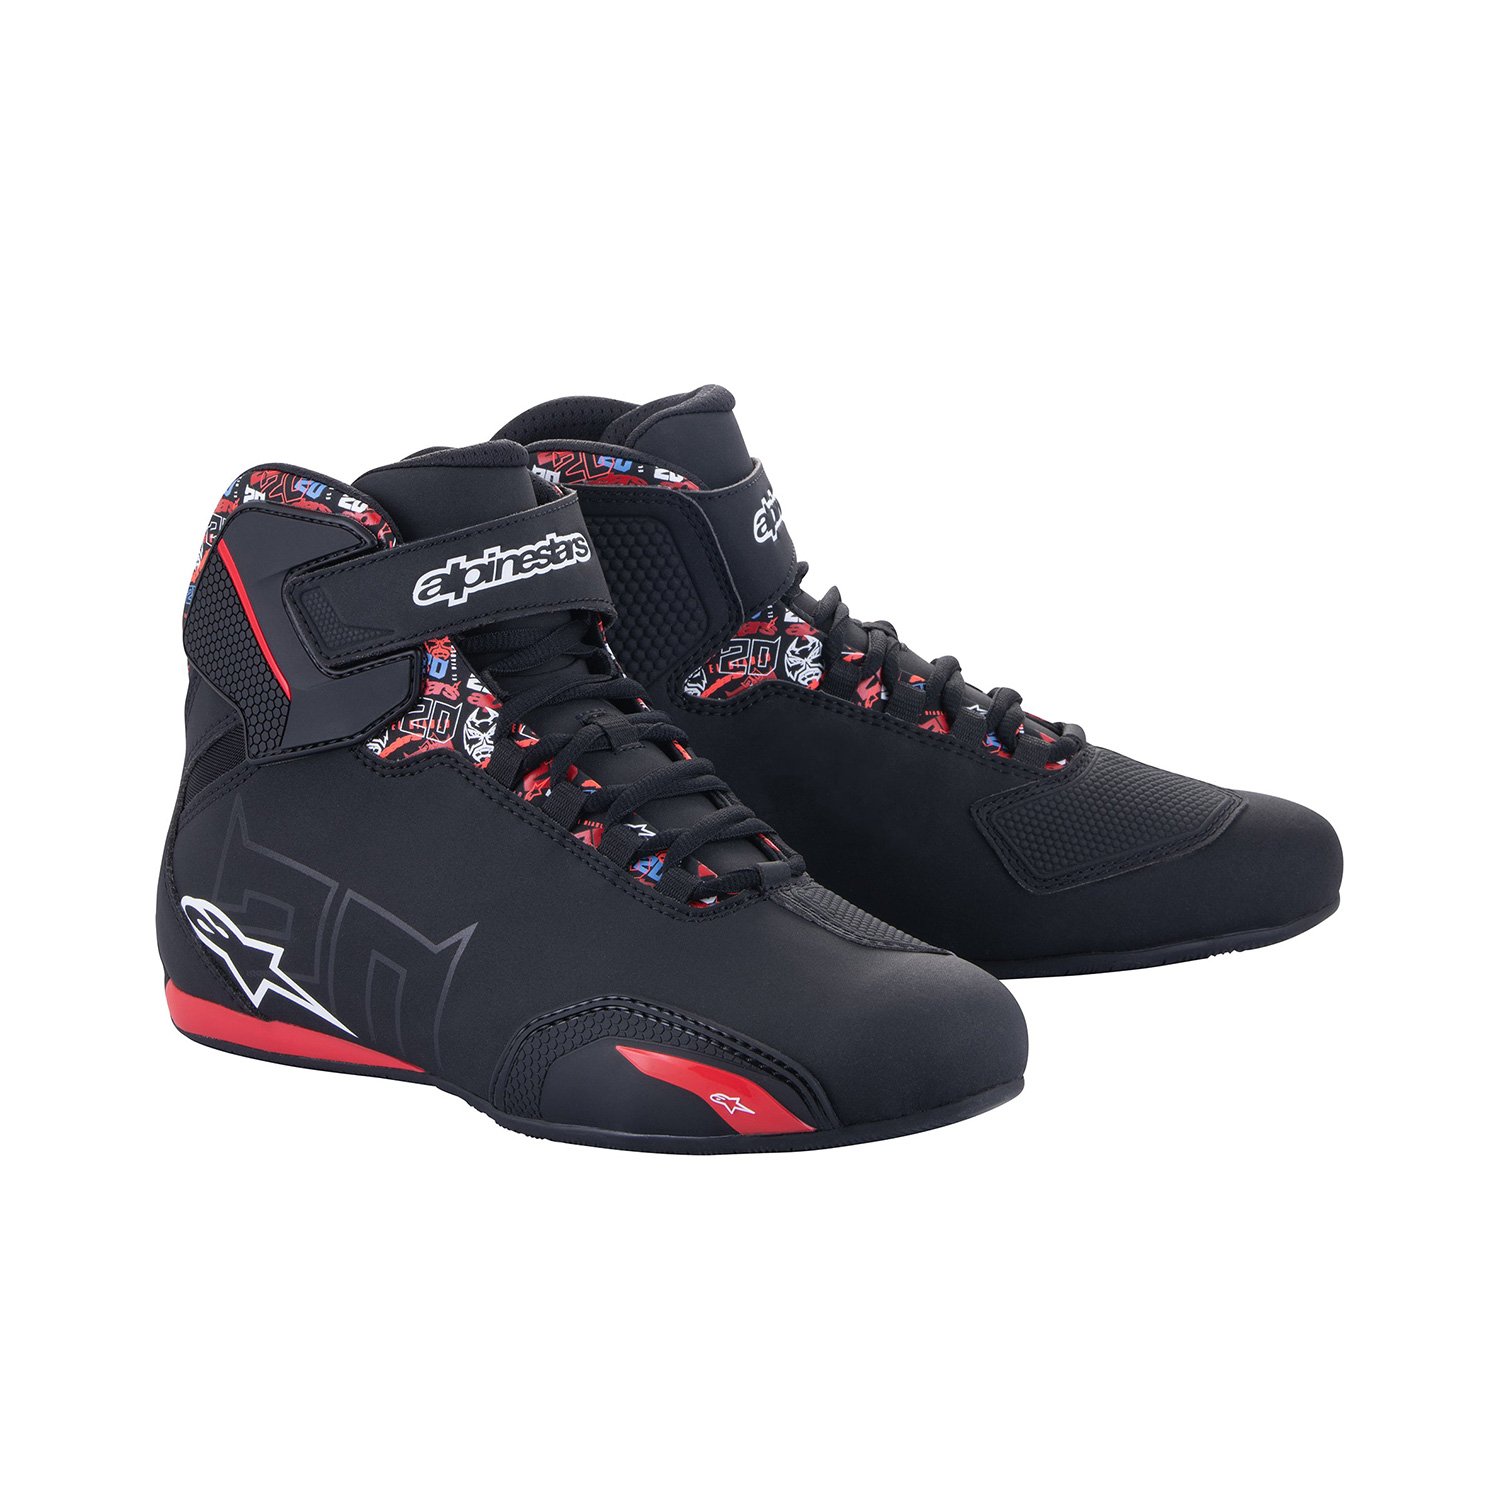 Image of EU Alpinestars FQ20 Sektor Noir Bright Rouge Chaussures Taille US 8